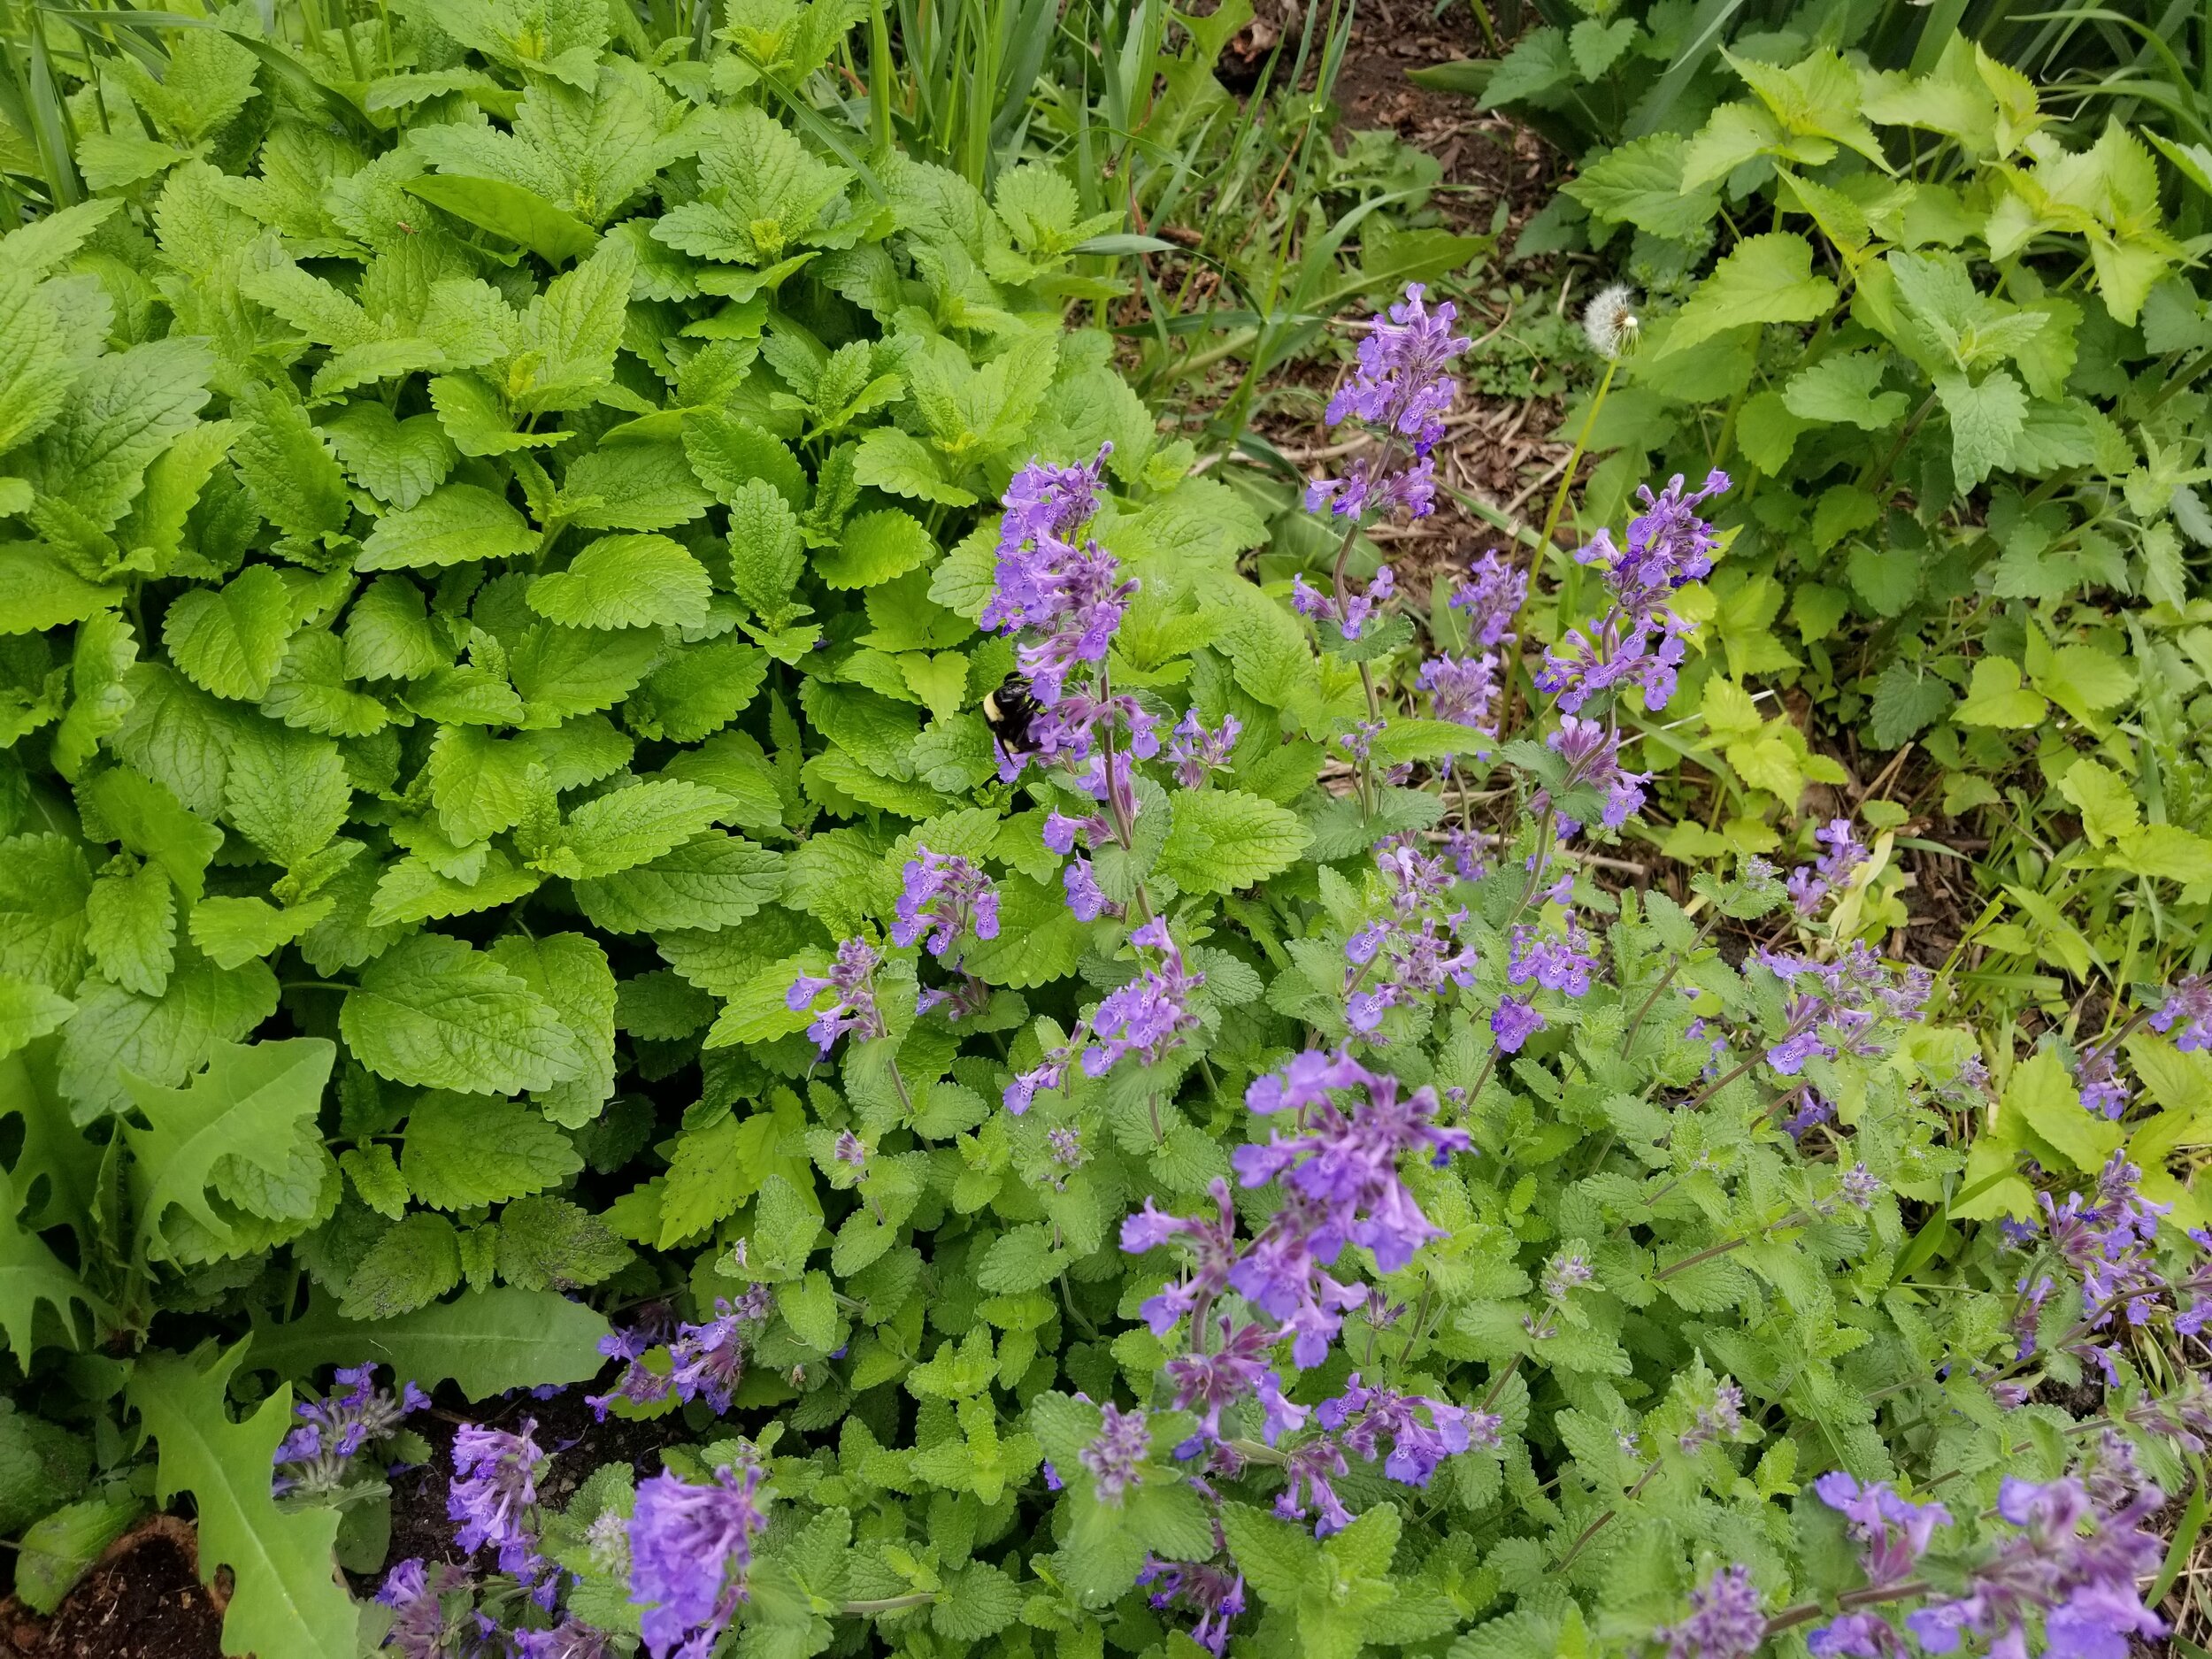 05.22.20 Bumblebee on catmint